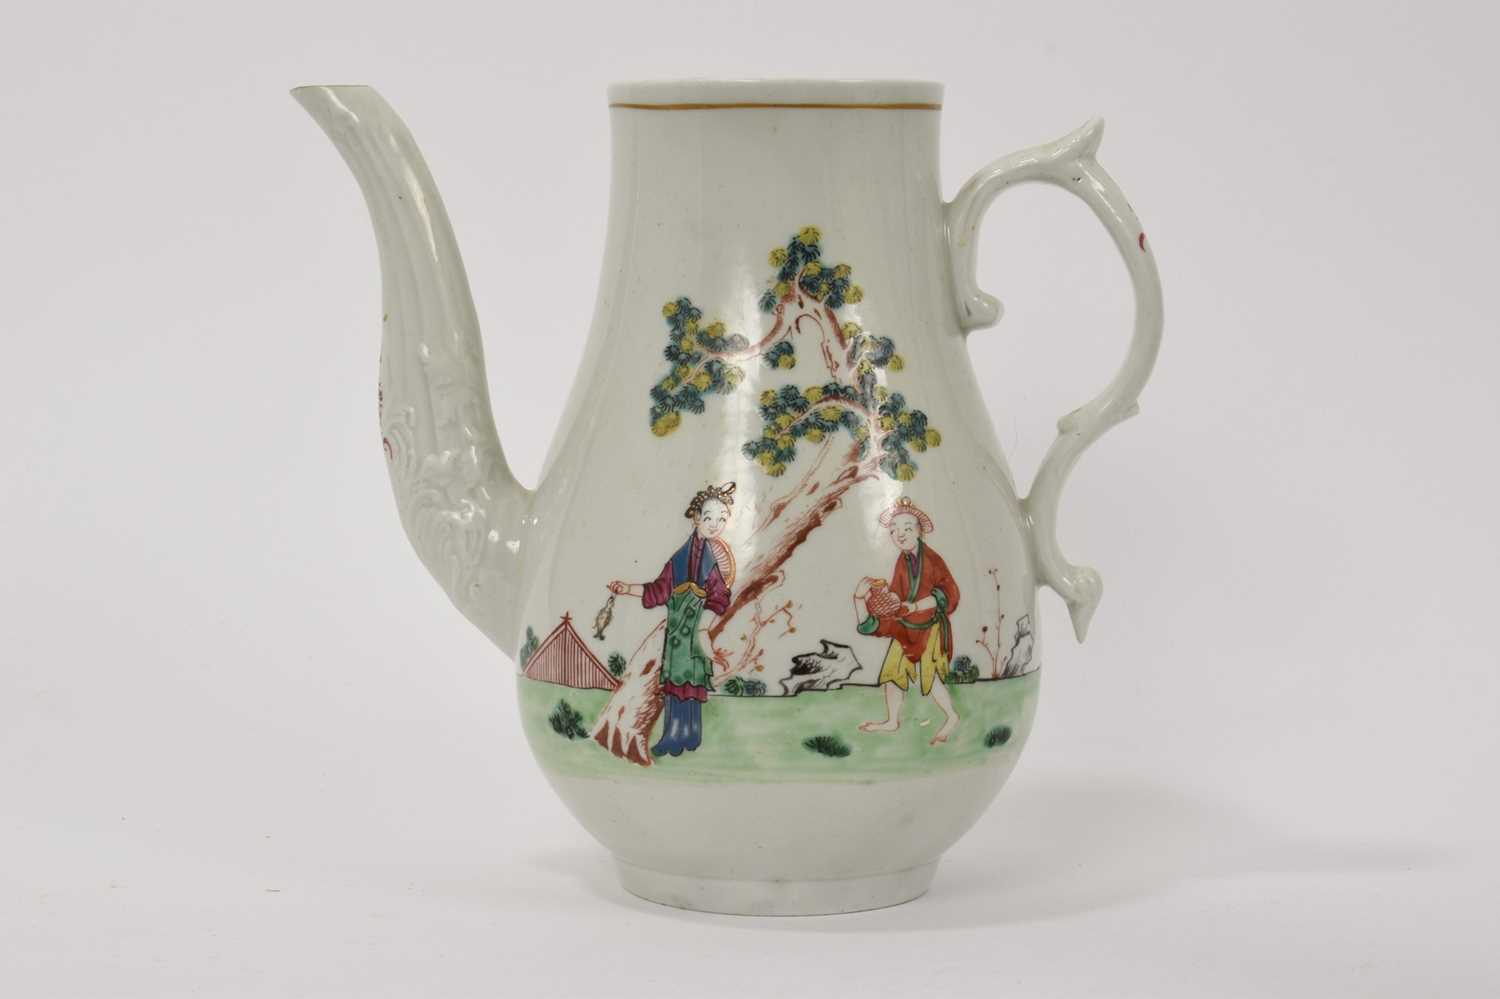 18th century Liverpool coffee pot with Chinese figures - Image 3 of 6